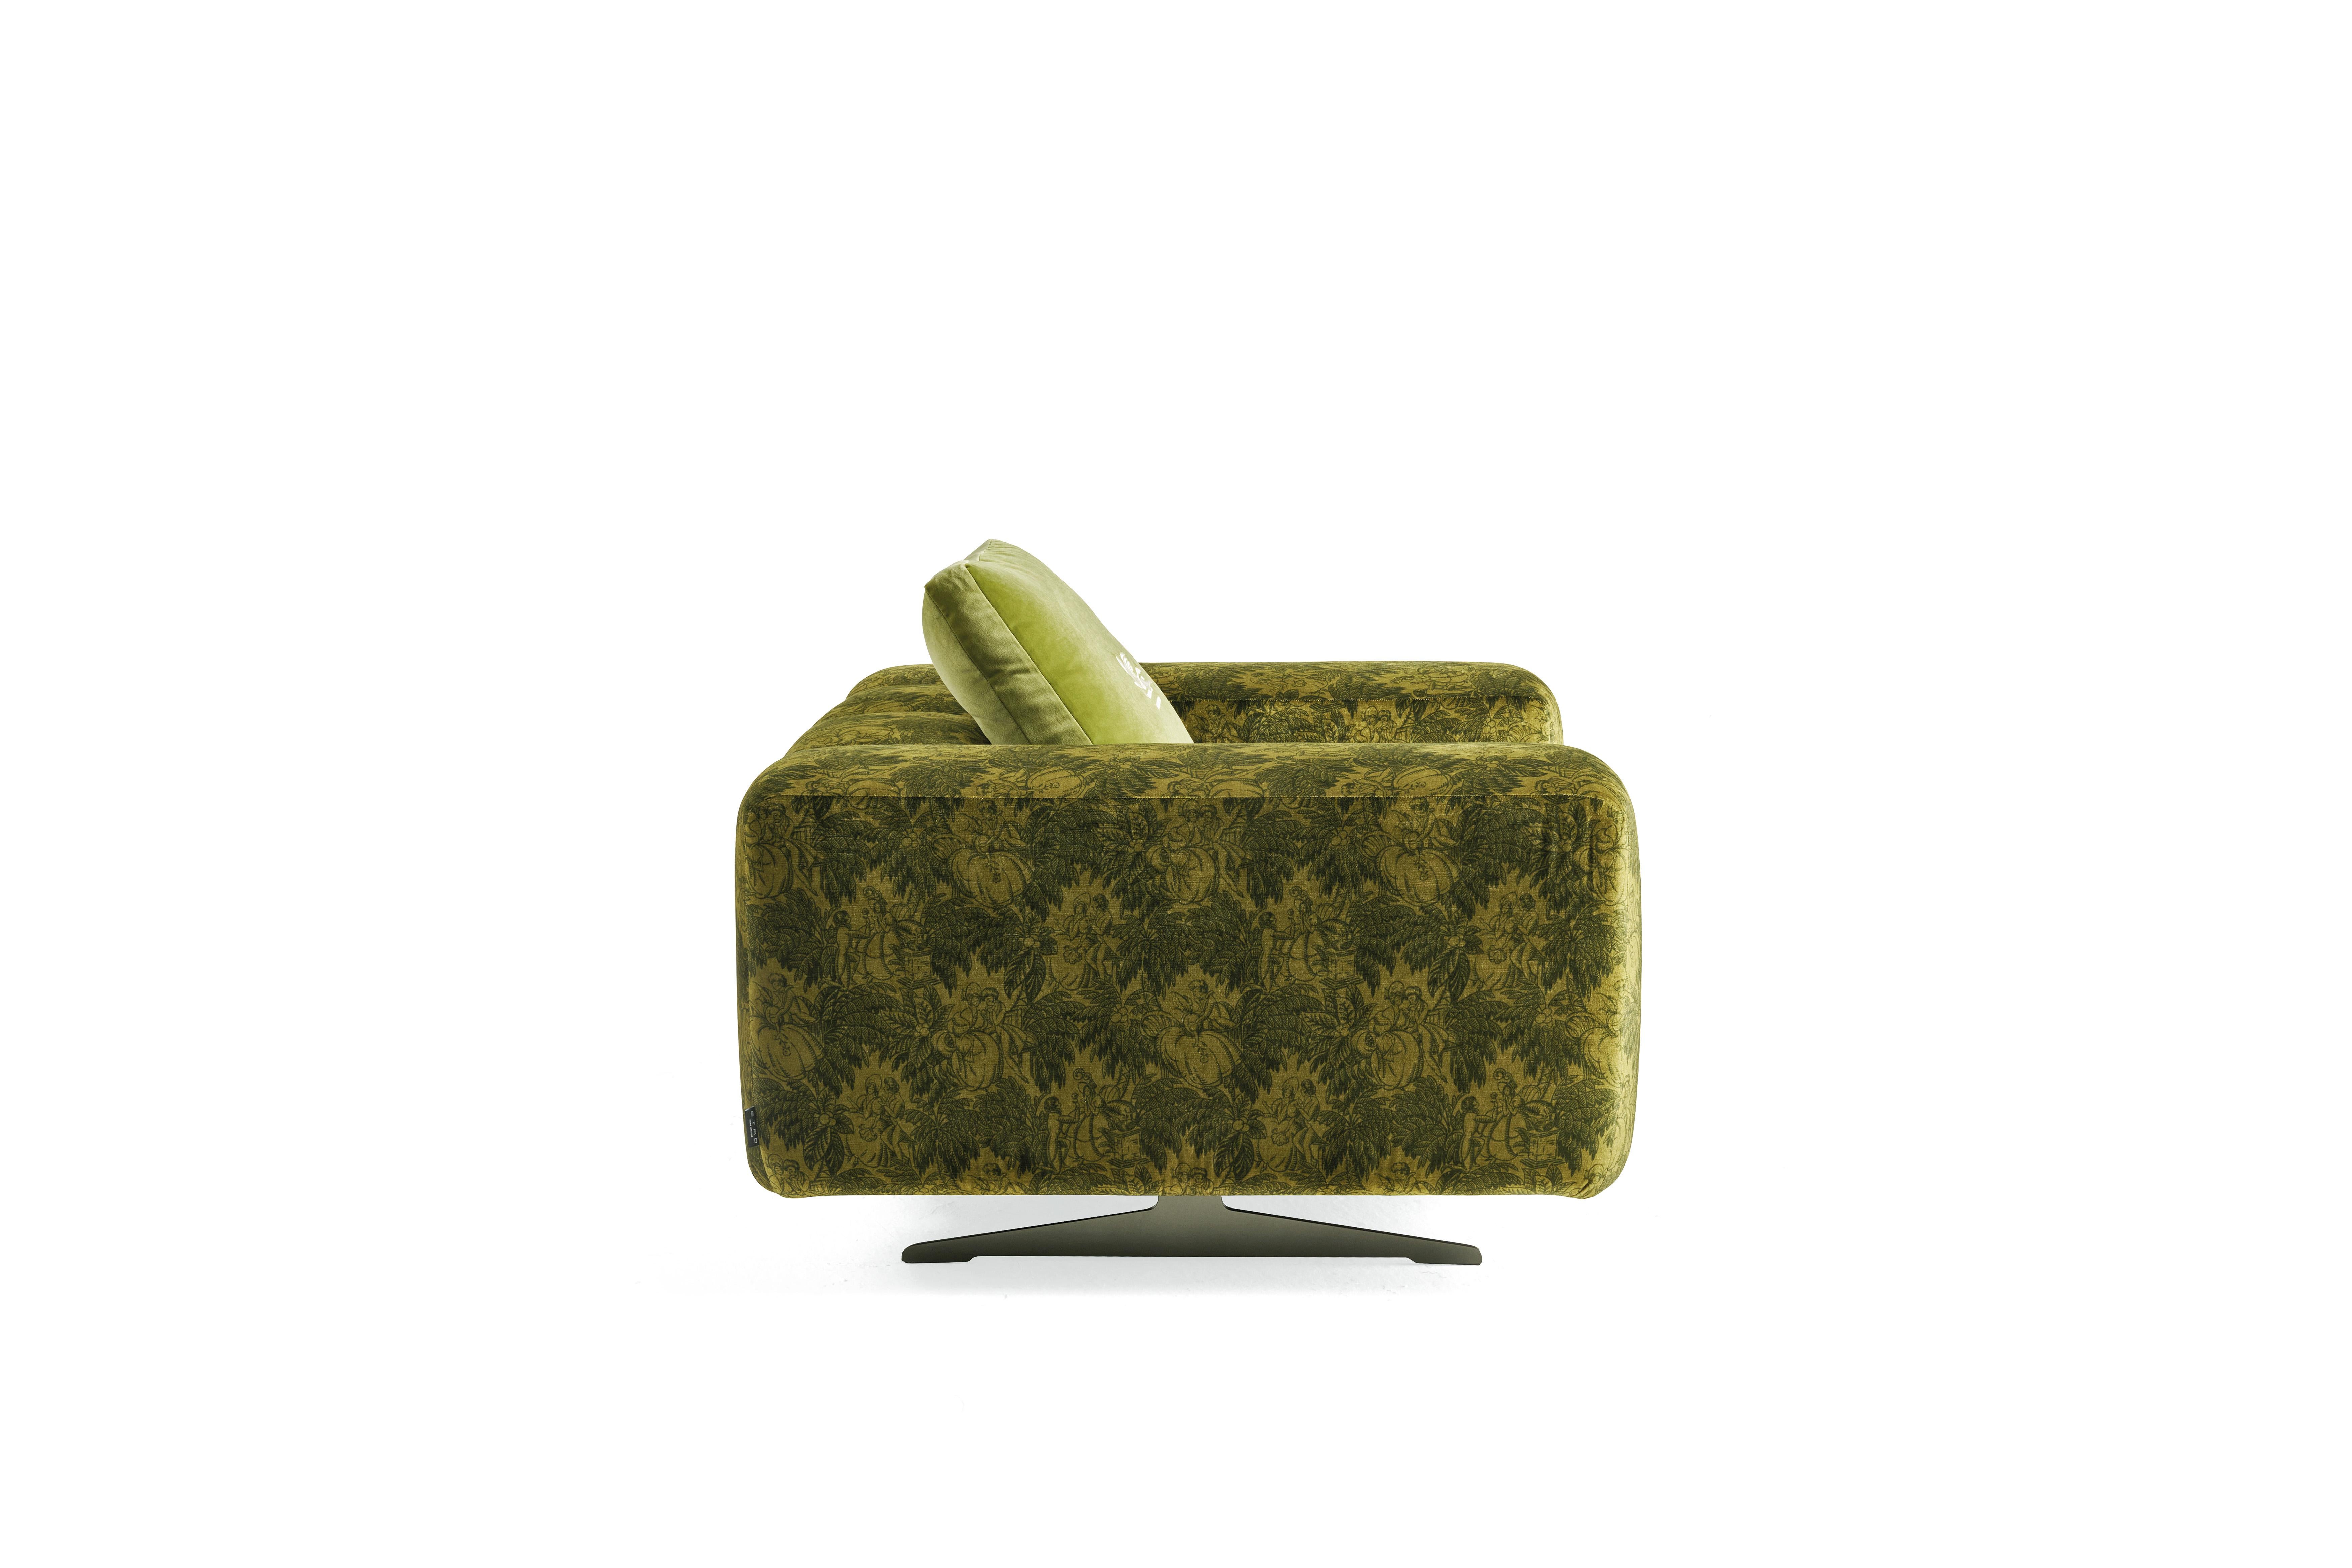 Italian 21st Century Ratio Up Armchair in Green Velvet by Etro Home Interiors For Sale